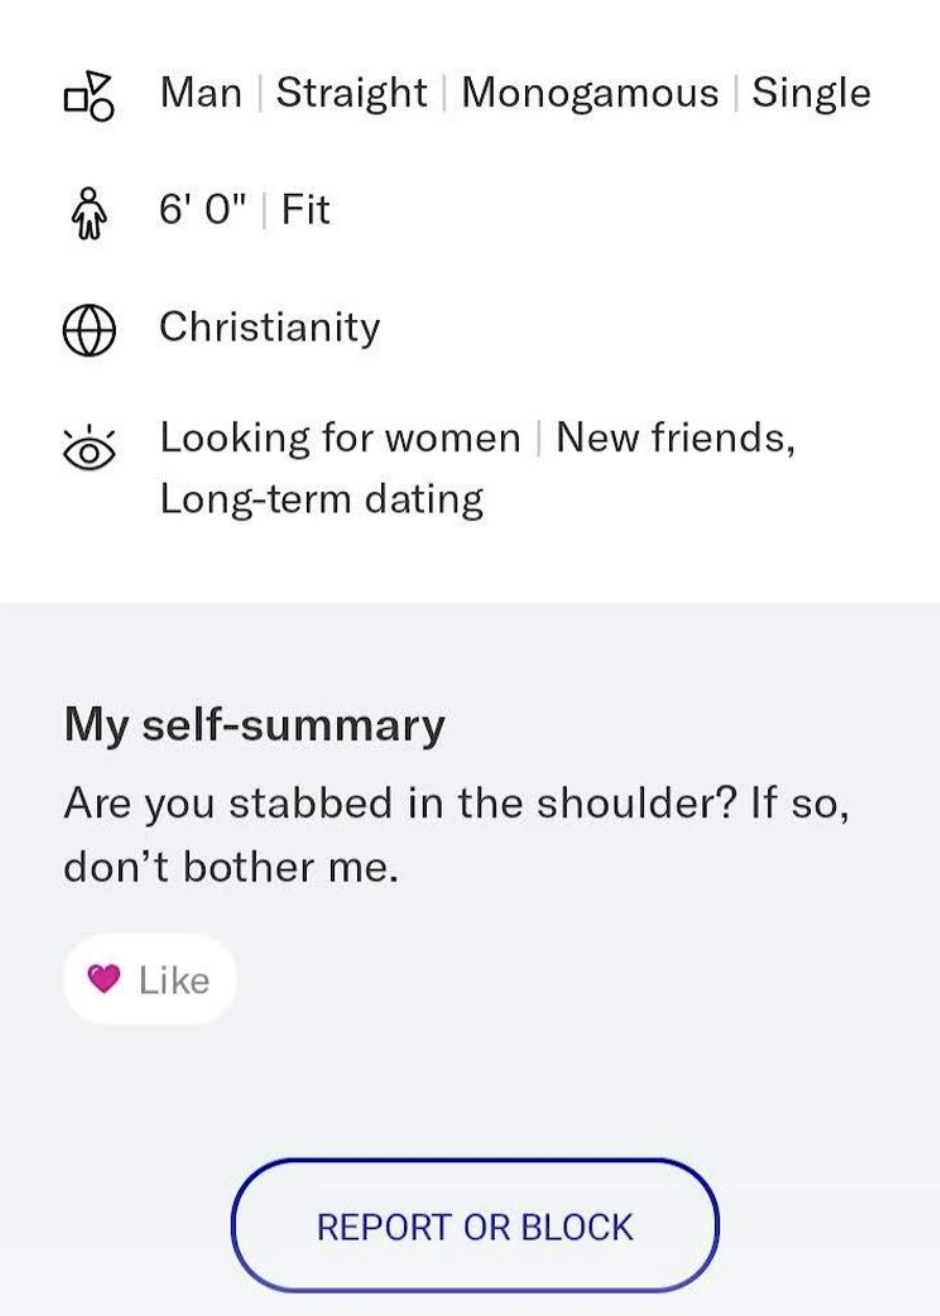 screenshot - Man Straight Monogamous Single 6'0" | Fit Christianity Looking for women | New friends, Longterm dating My selfsummary Are you stabbed in the shoulder? If so, don't bother me. Report Or Block